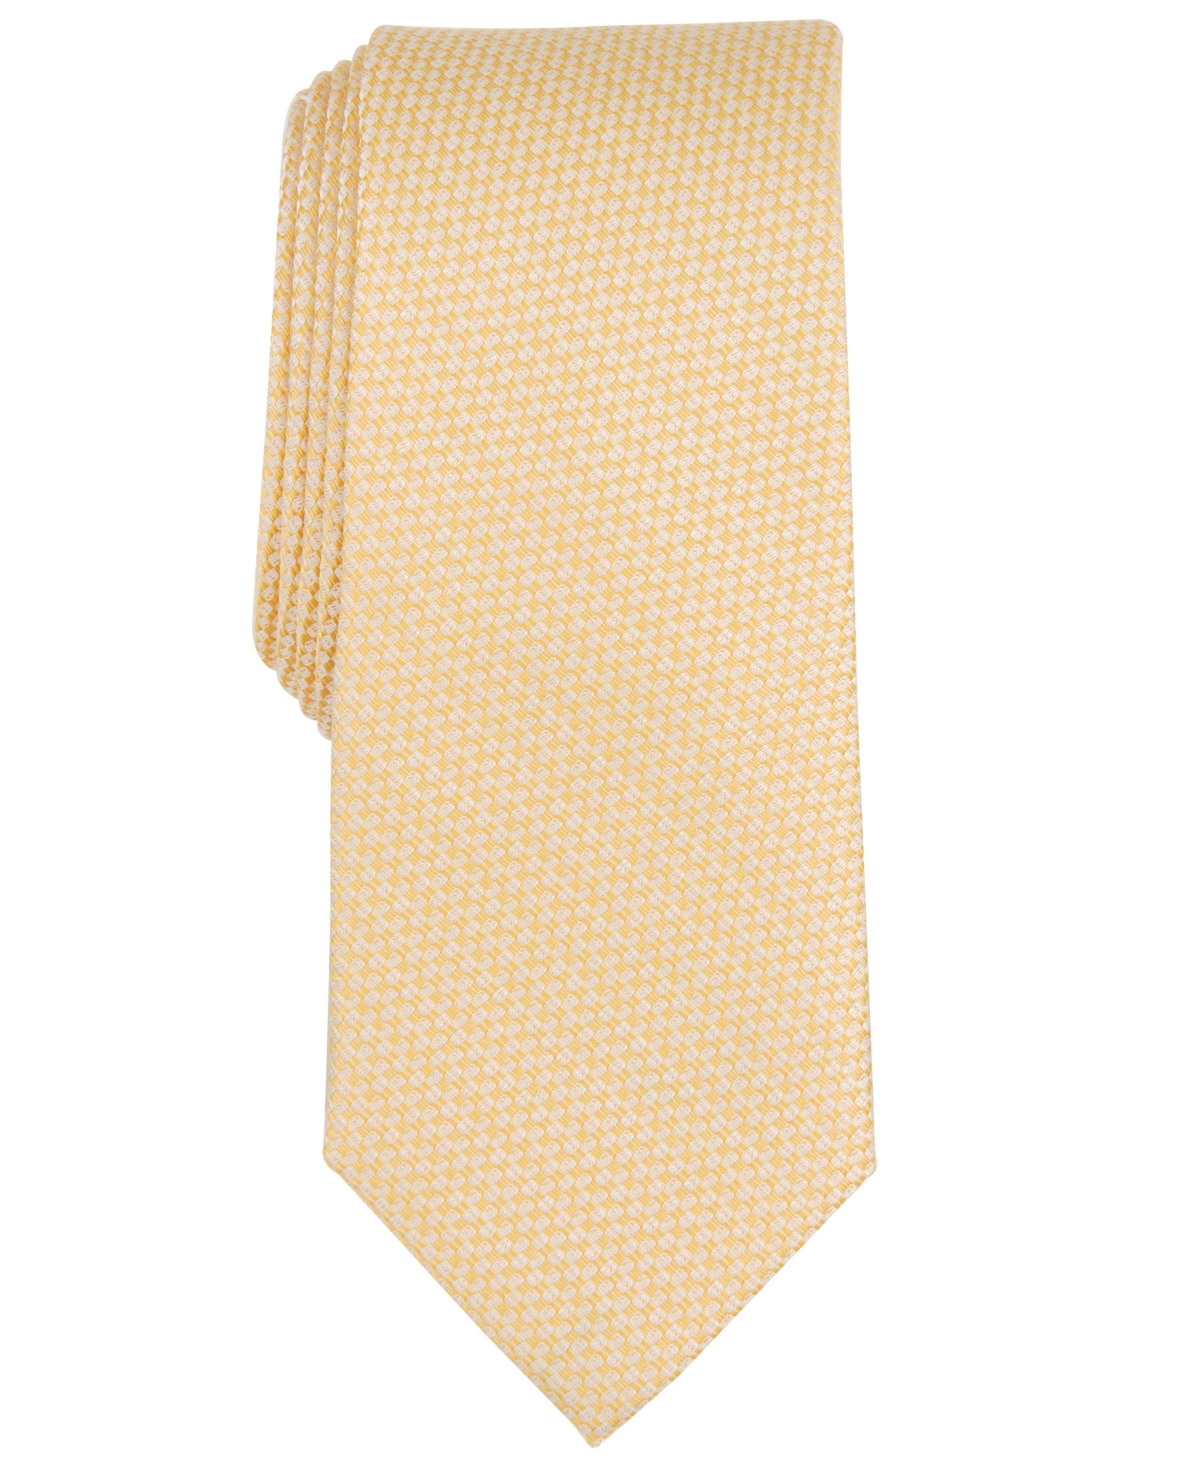 Men's Lombard Textured Tie, Created for Macy's - Yellow